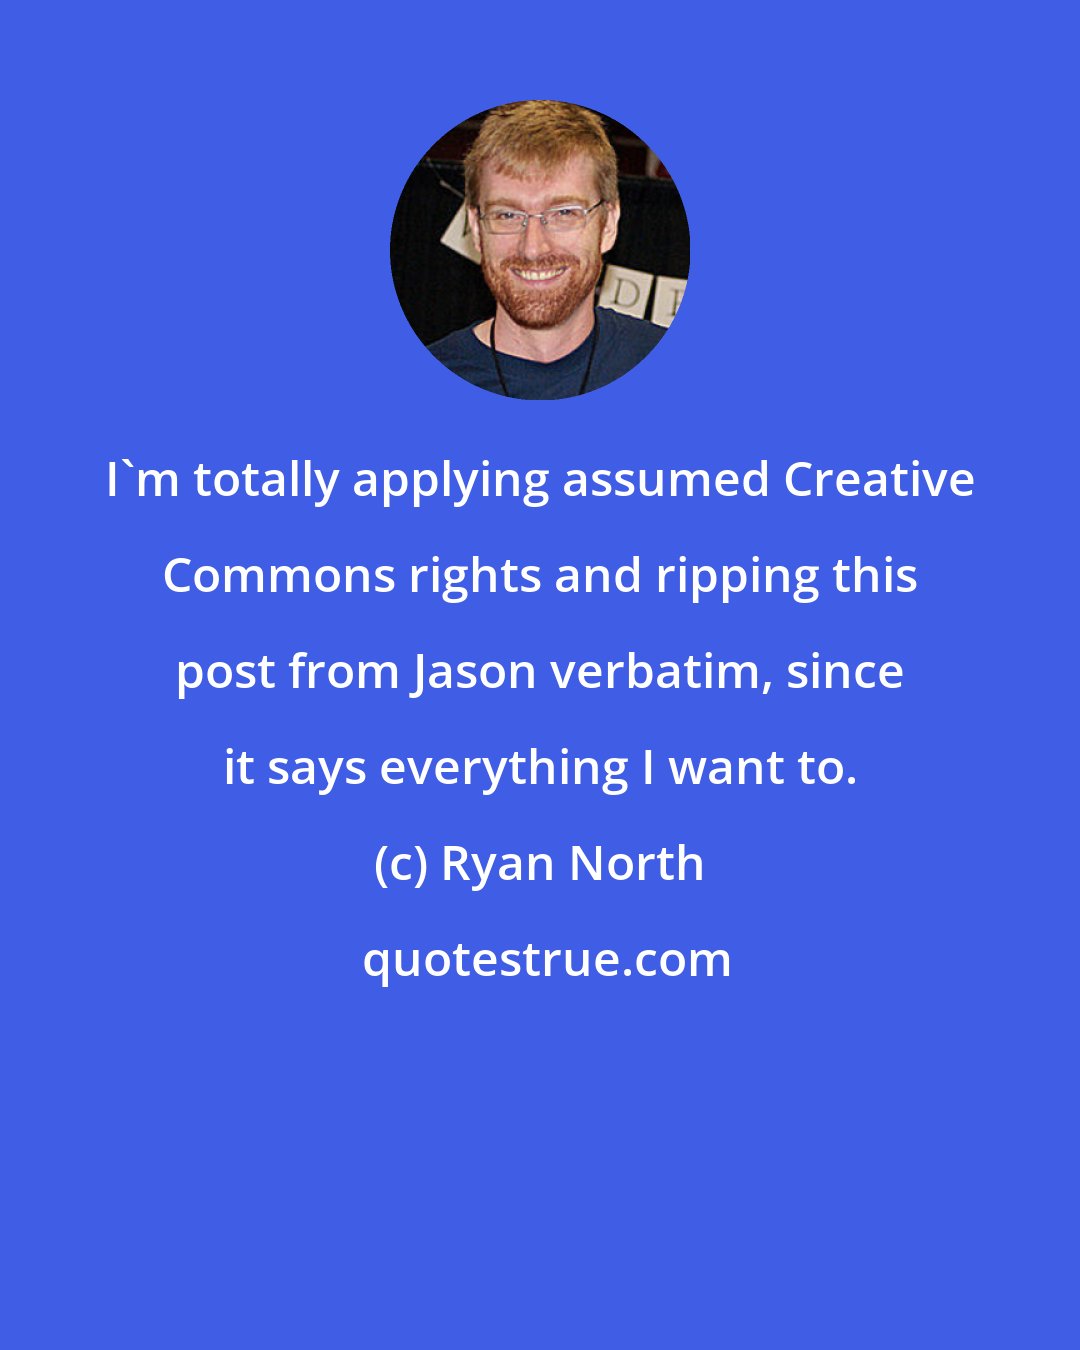 Ryan North: I'm totally applying assumed Creative Commons rights and ripping this post from Jason verbatim, since it says everything I want to.